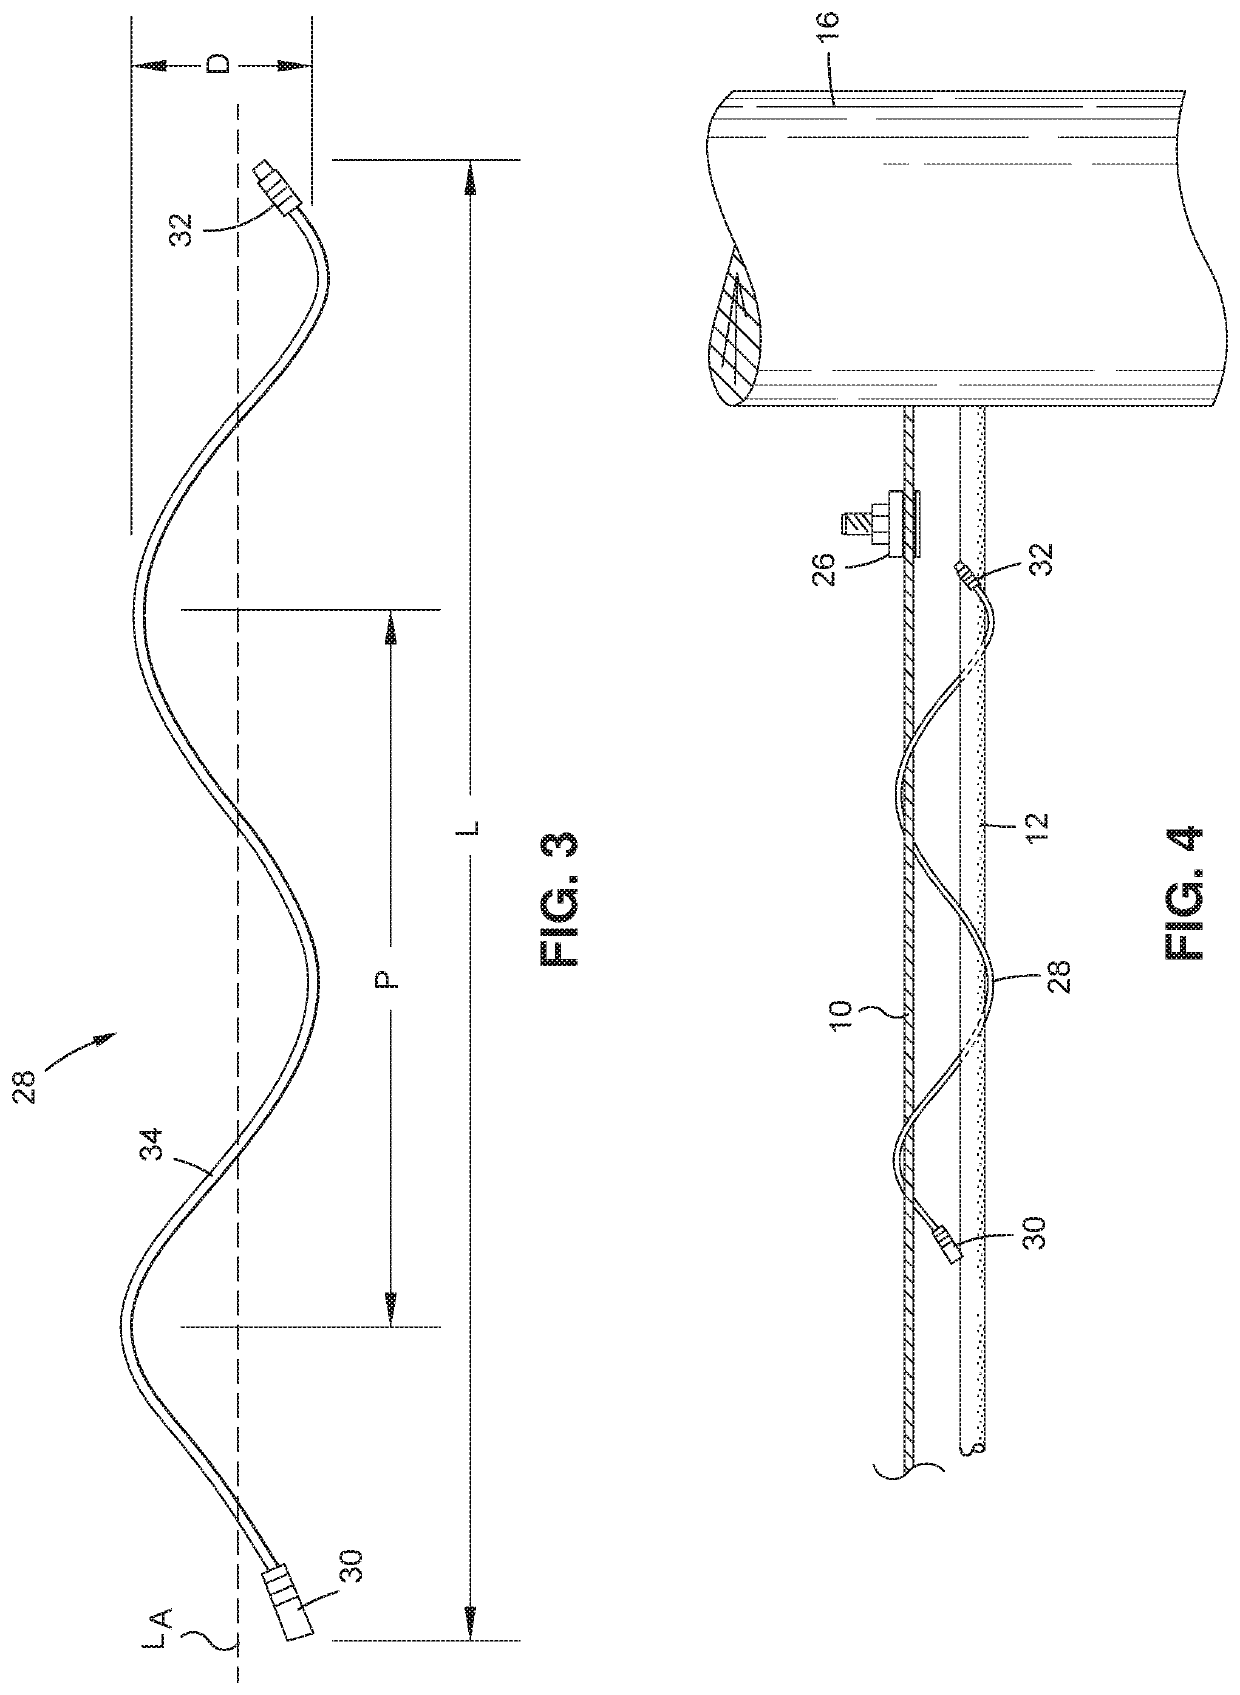 Method of installing spiral hangers about a messenger line while removing lashing wire